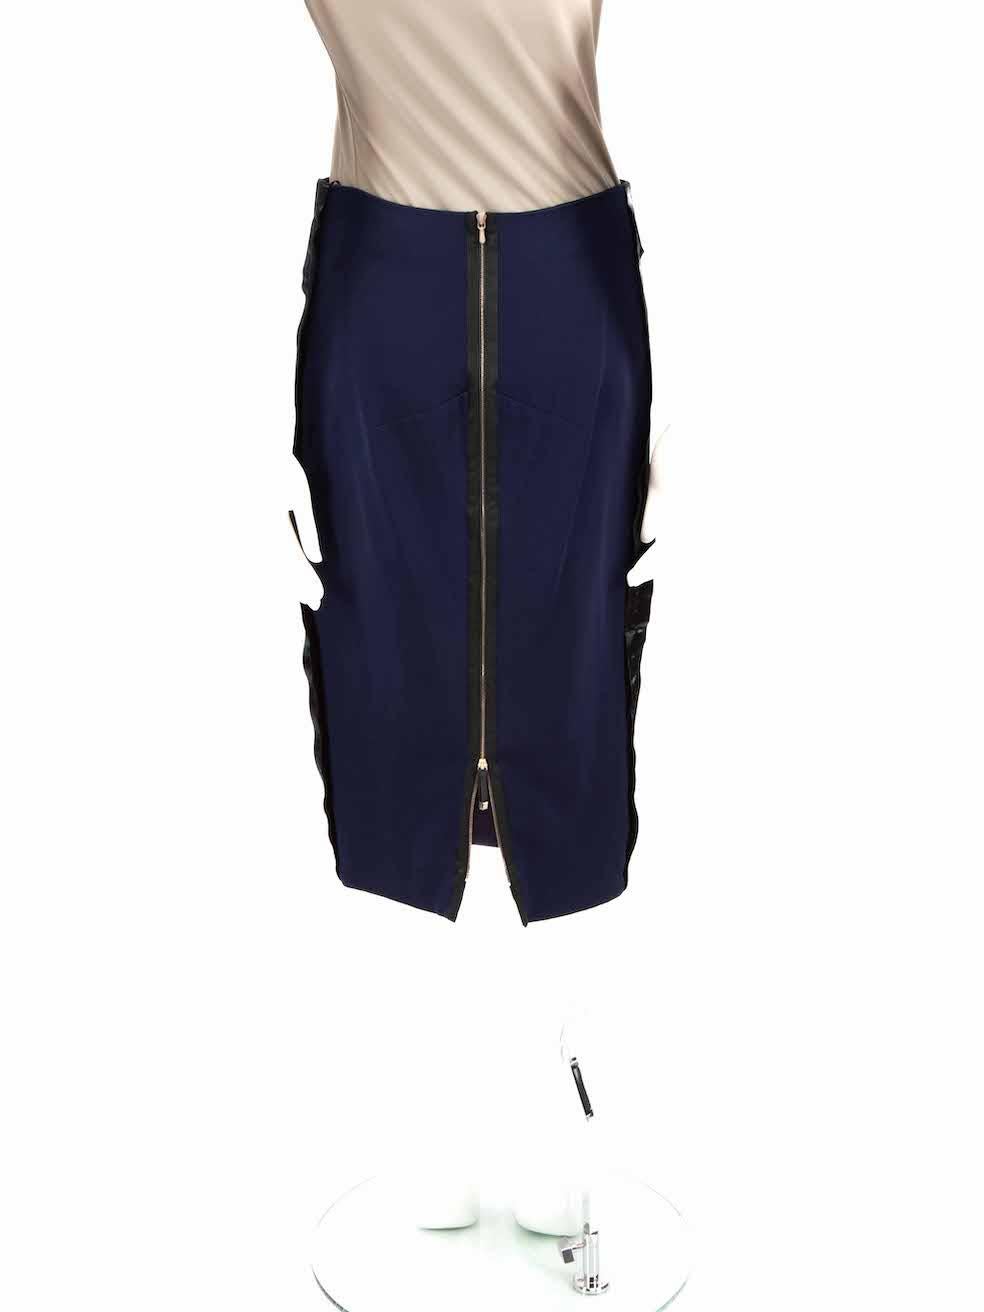 Victoria Beckham Navy Silk No.012 Reflective Trim Skirt Size L In Good Condition For Sale In London, GB